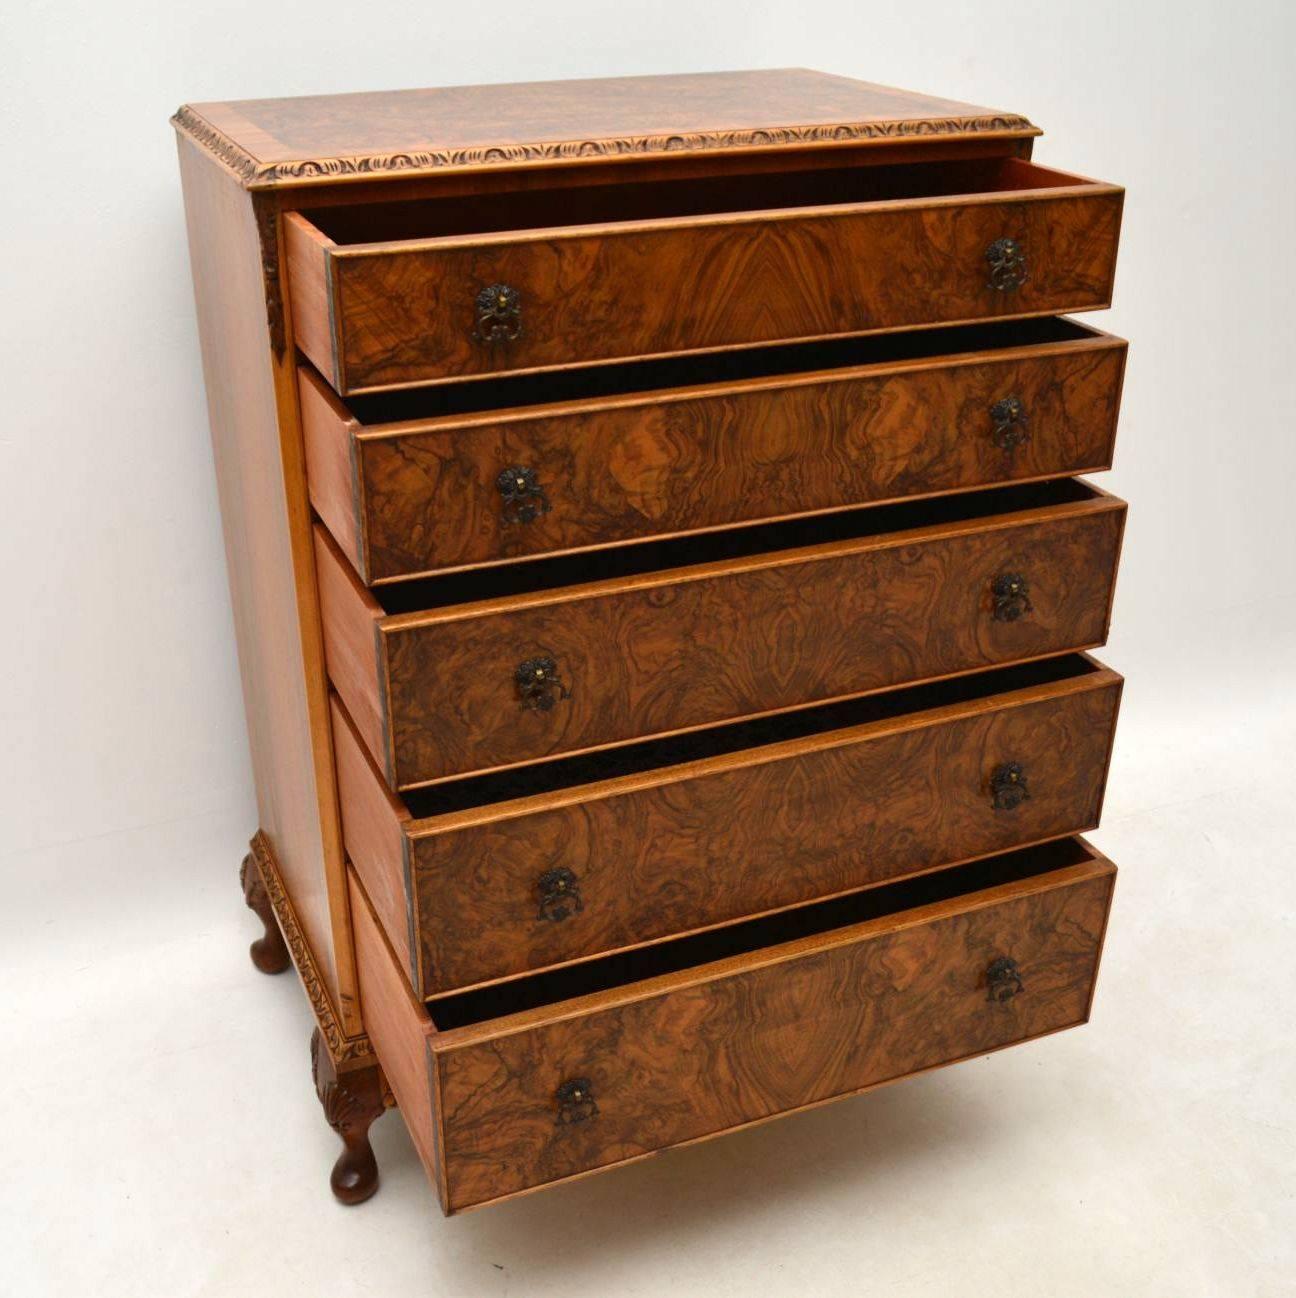 This antique burr walnut chest of drawers is a very attractive and functional piece of furniture. It has five graduated drawers with original brass handles. The top is burr walnut with a figured walnut cross banding. There is a lovely patterned burr